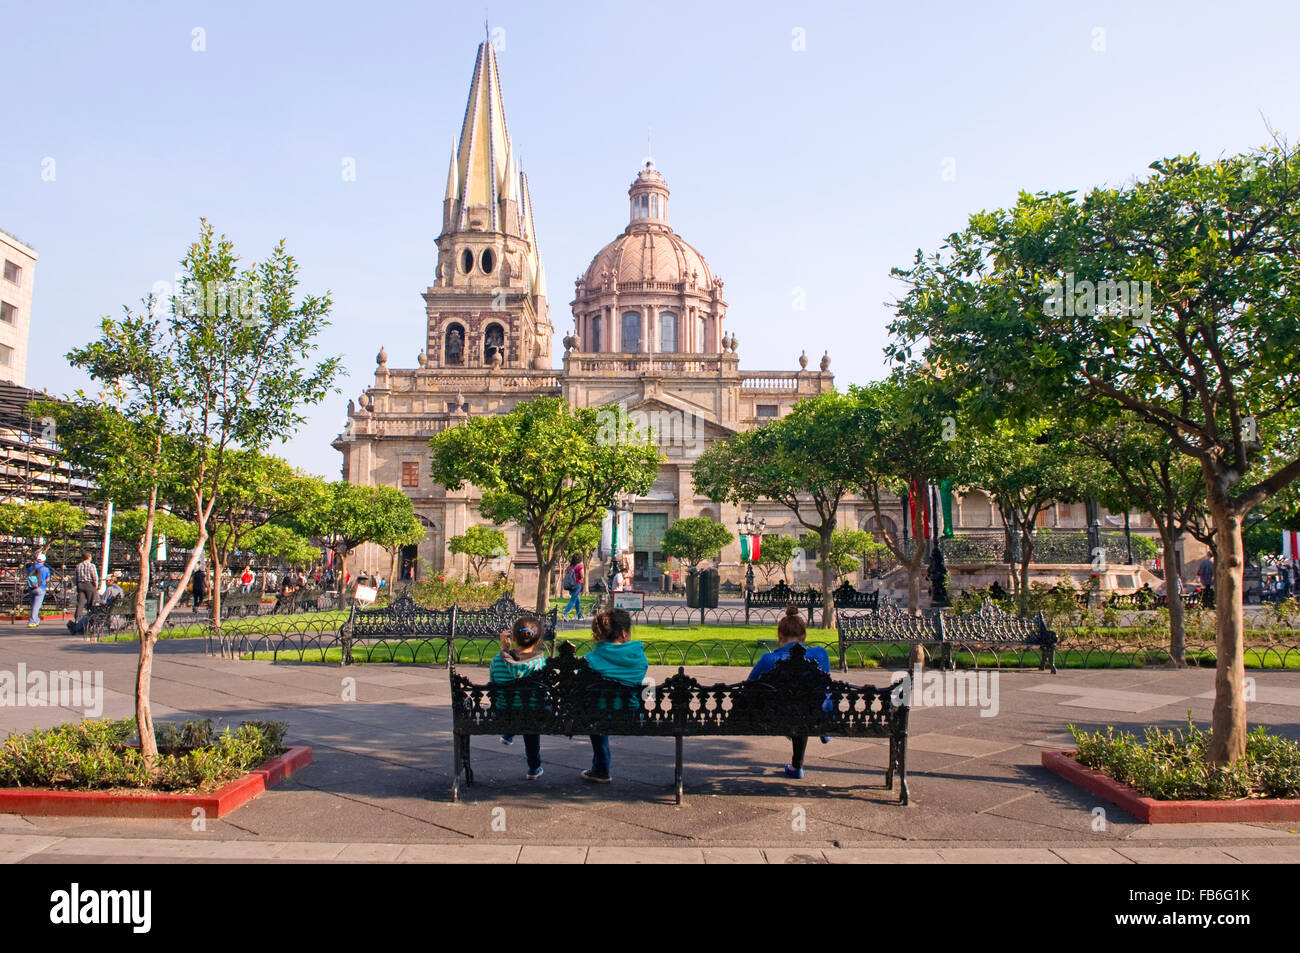 People relaxing in the square (plaza) near the Metropolitana Caatedral (cathedral) in Guadalajara, Mexico Stock Photo